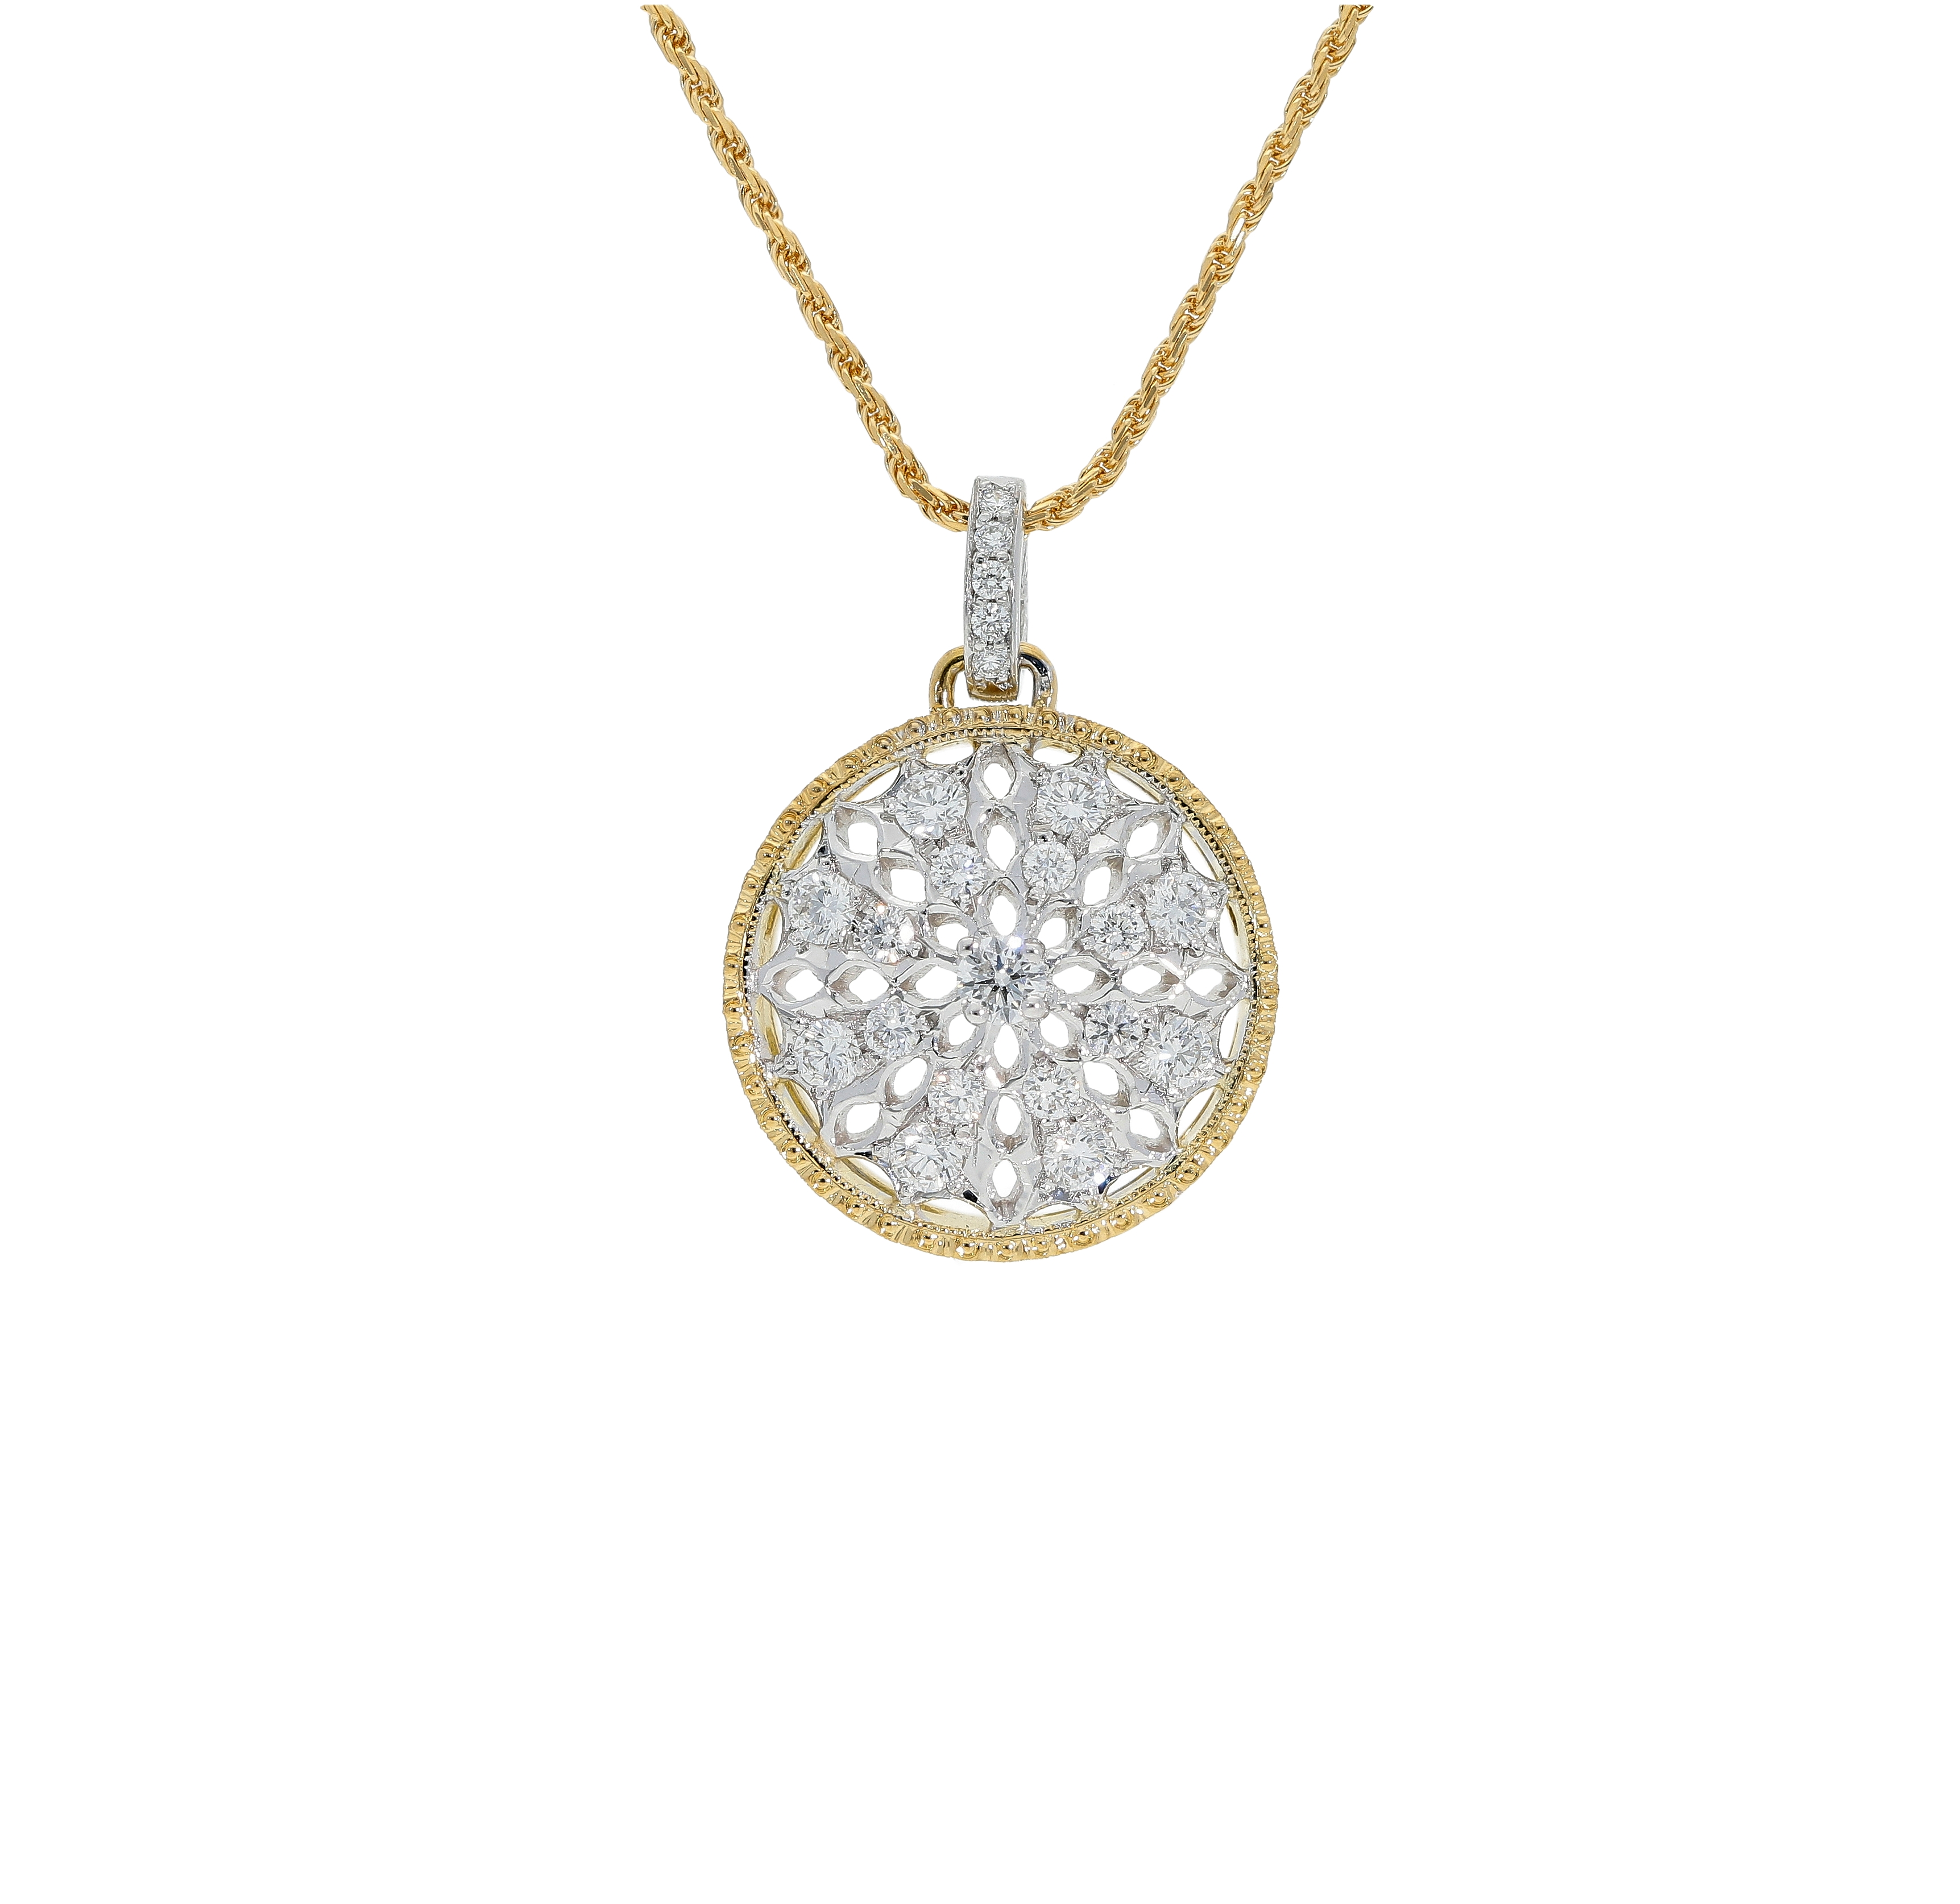 FLORENTINE PENDANT NECKLACE IN 18KT YELLOW AND WHITE GOLD